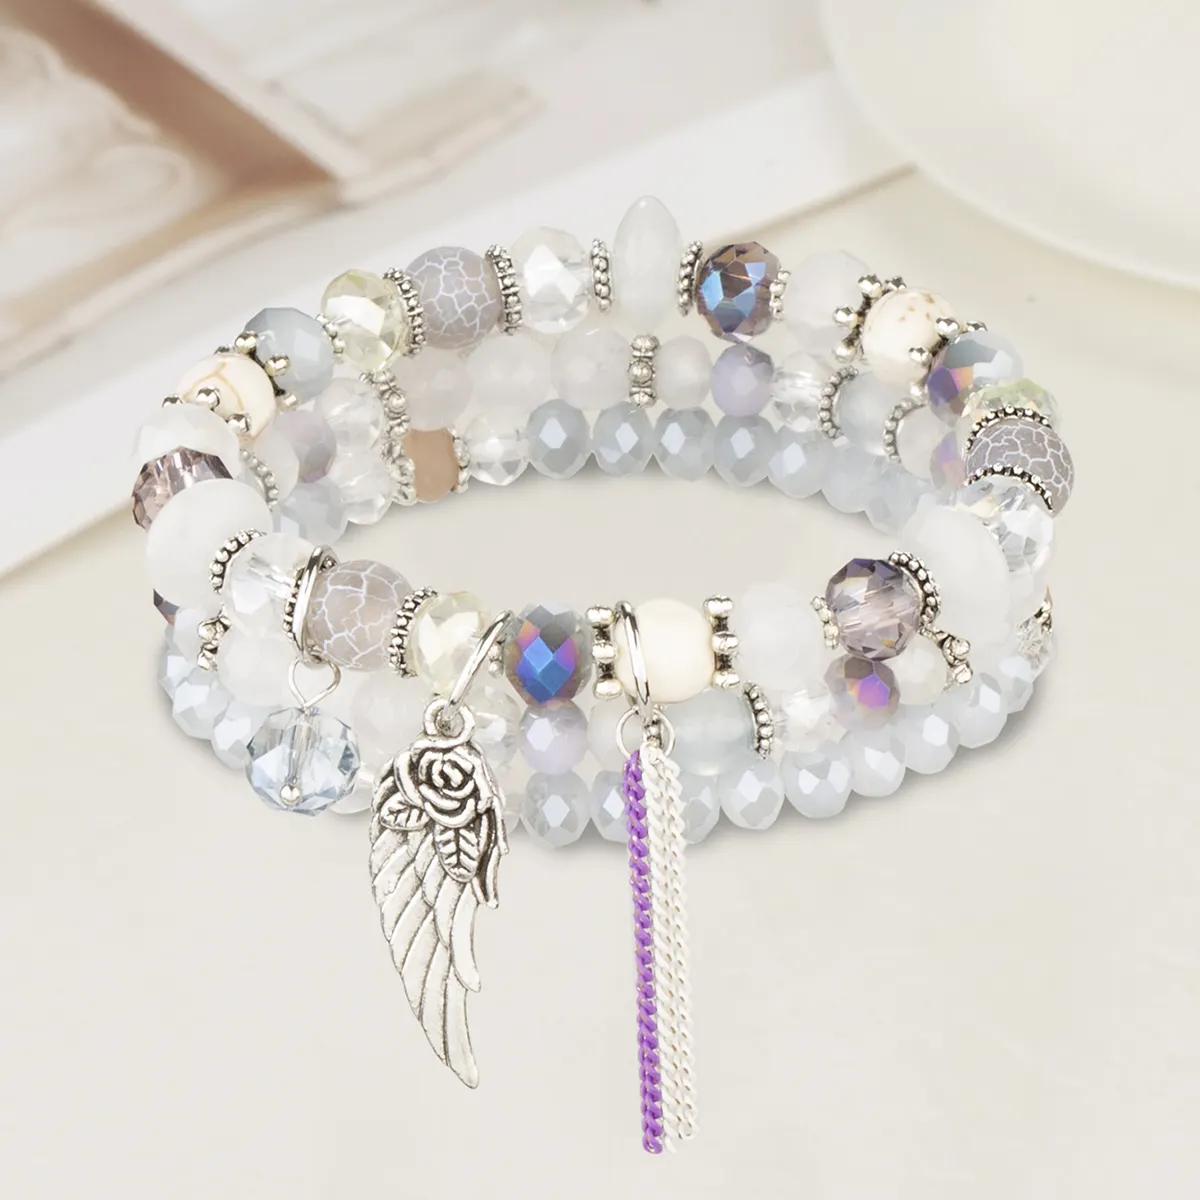 2023 New Wholesale High Quality Fashion Stone Crystal Glass Beads Multiple Bracelets For Women